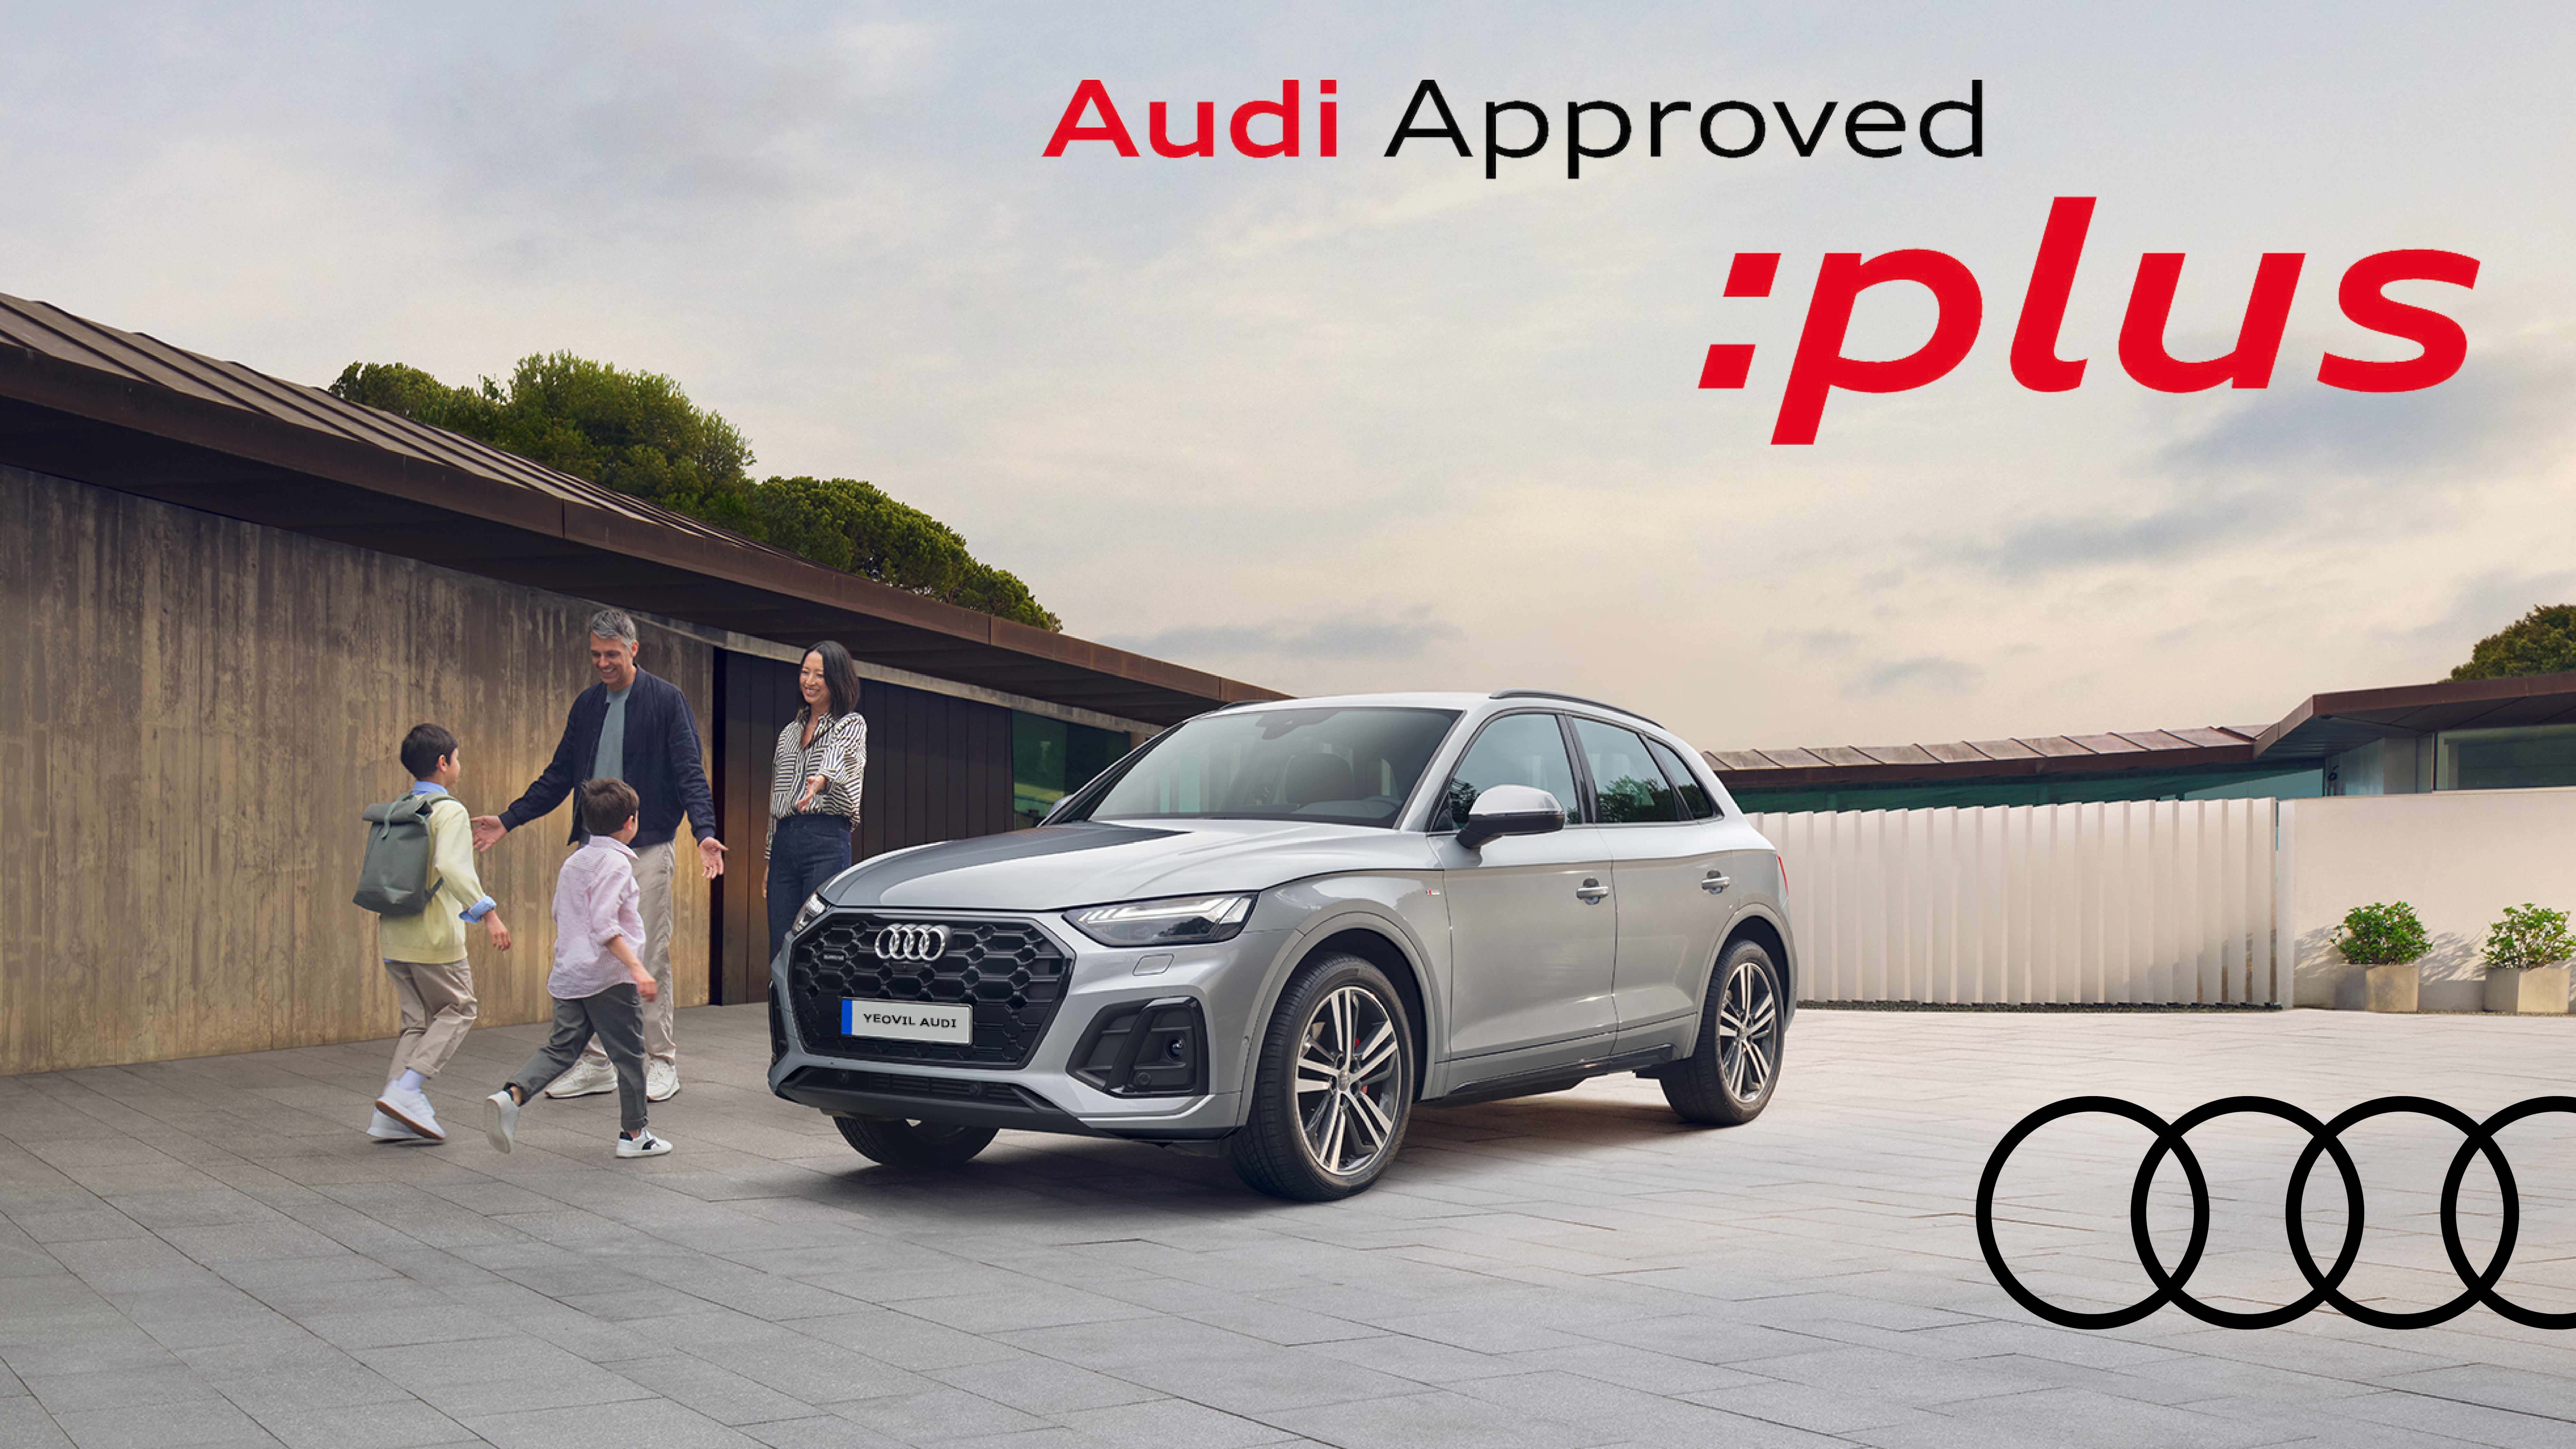 Audi Approved Plus